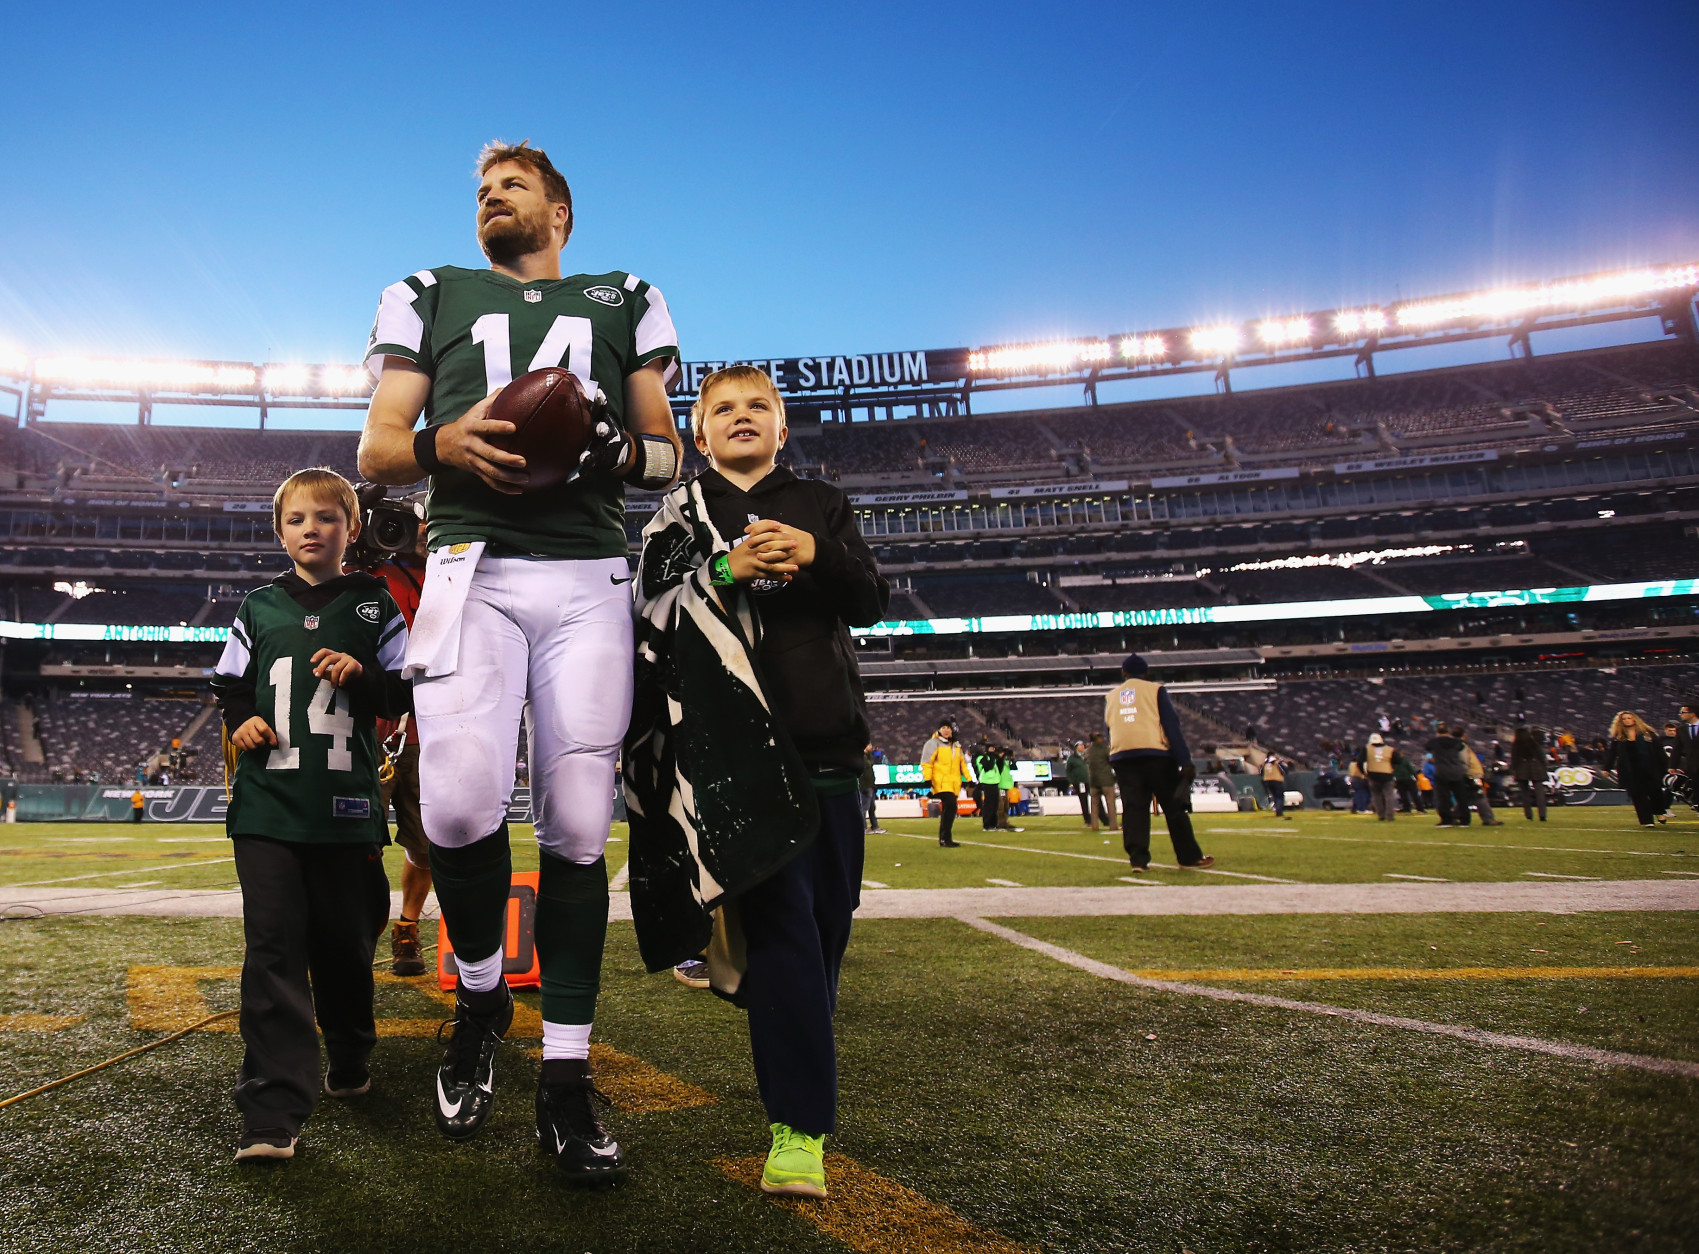 EAST RUTHERFORD, NJ - NOVEMBER 29:  Ryan Fitzpatrick #14 of the New York Jets walks off the field with his children after their 38-20 win against the Miami Dolphin at MetLife Stadium on November 29, 2015 in East Rutherford, New Jersey.  (Photo by Al Bello/Getty Images)